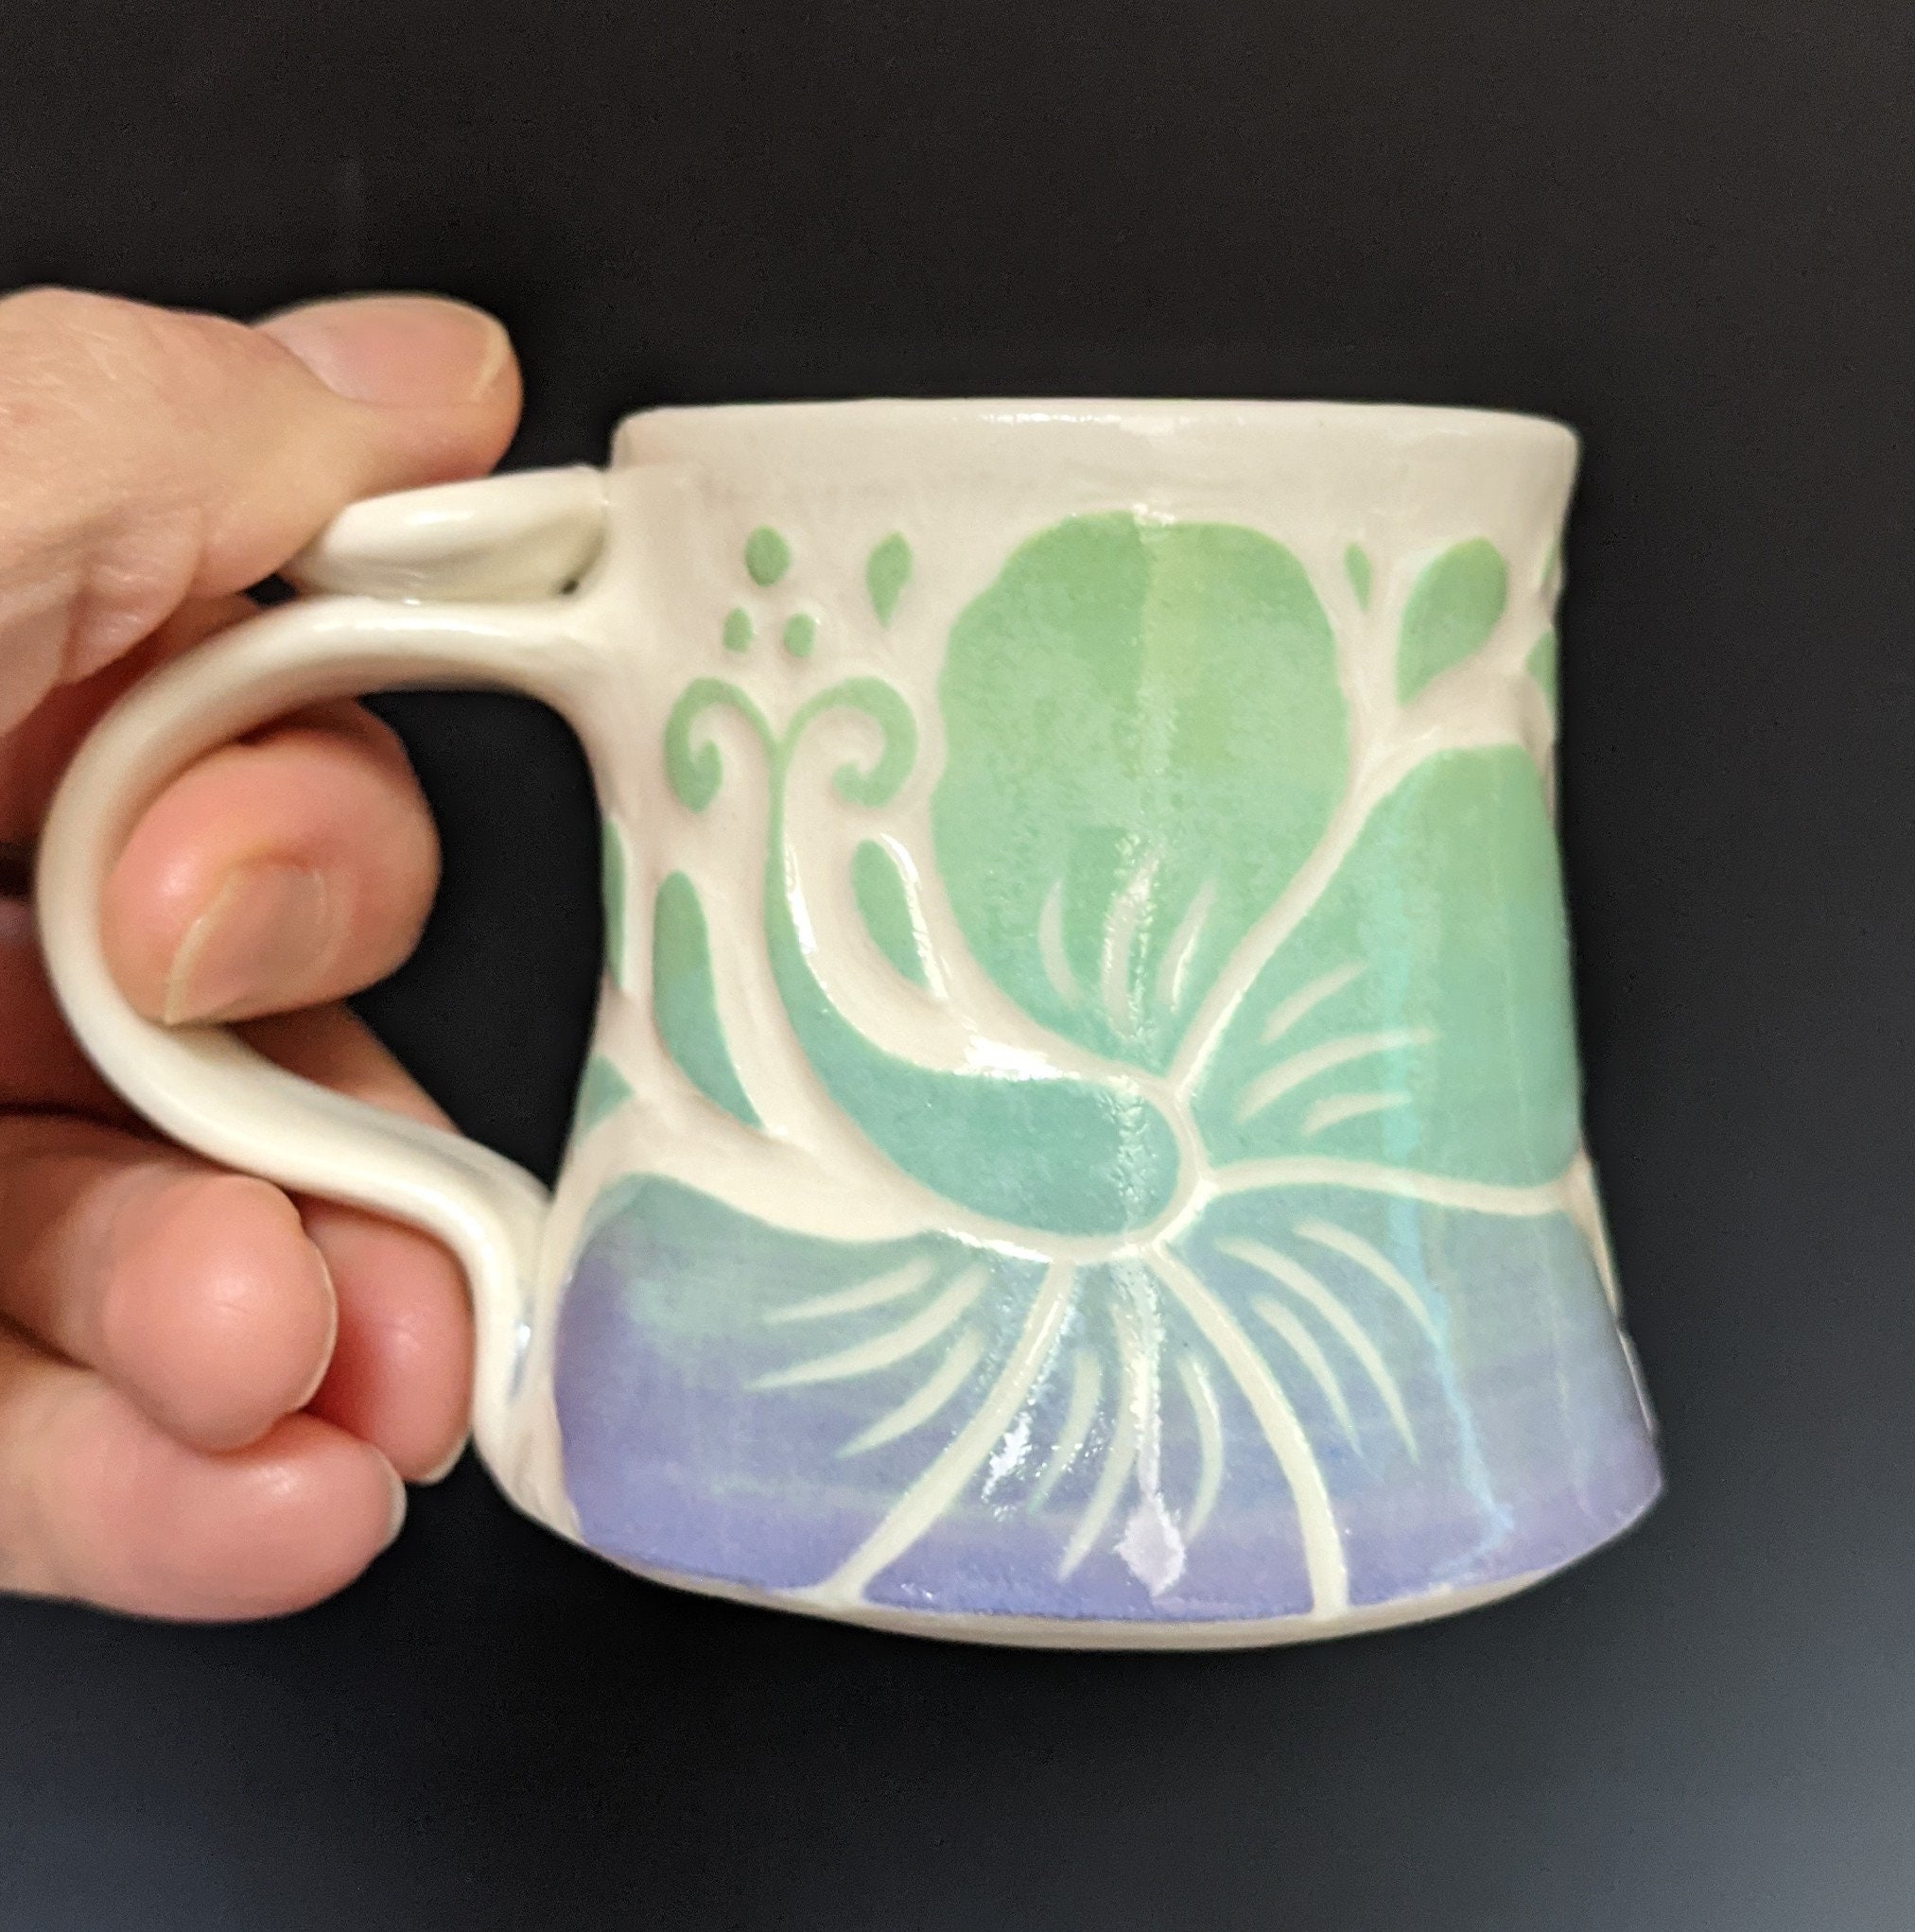 Espresso Cup Handcrafted Pottery in Vermont Green Mountain Green